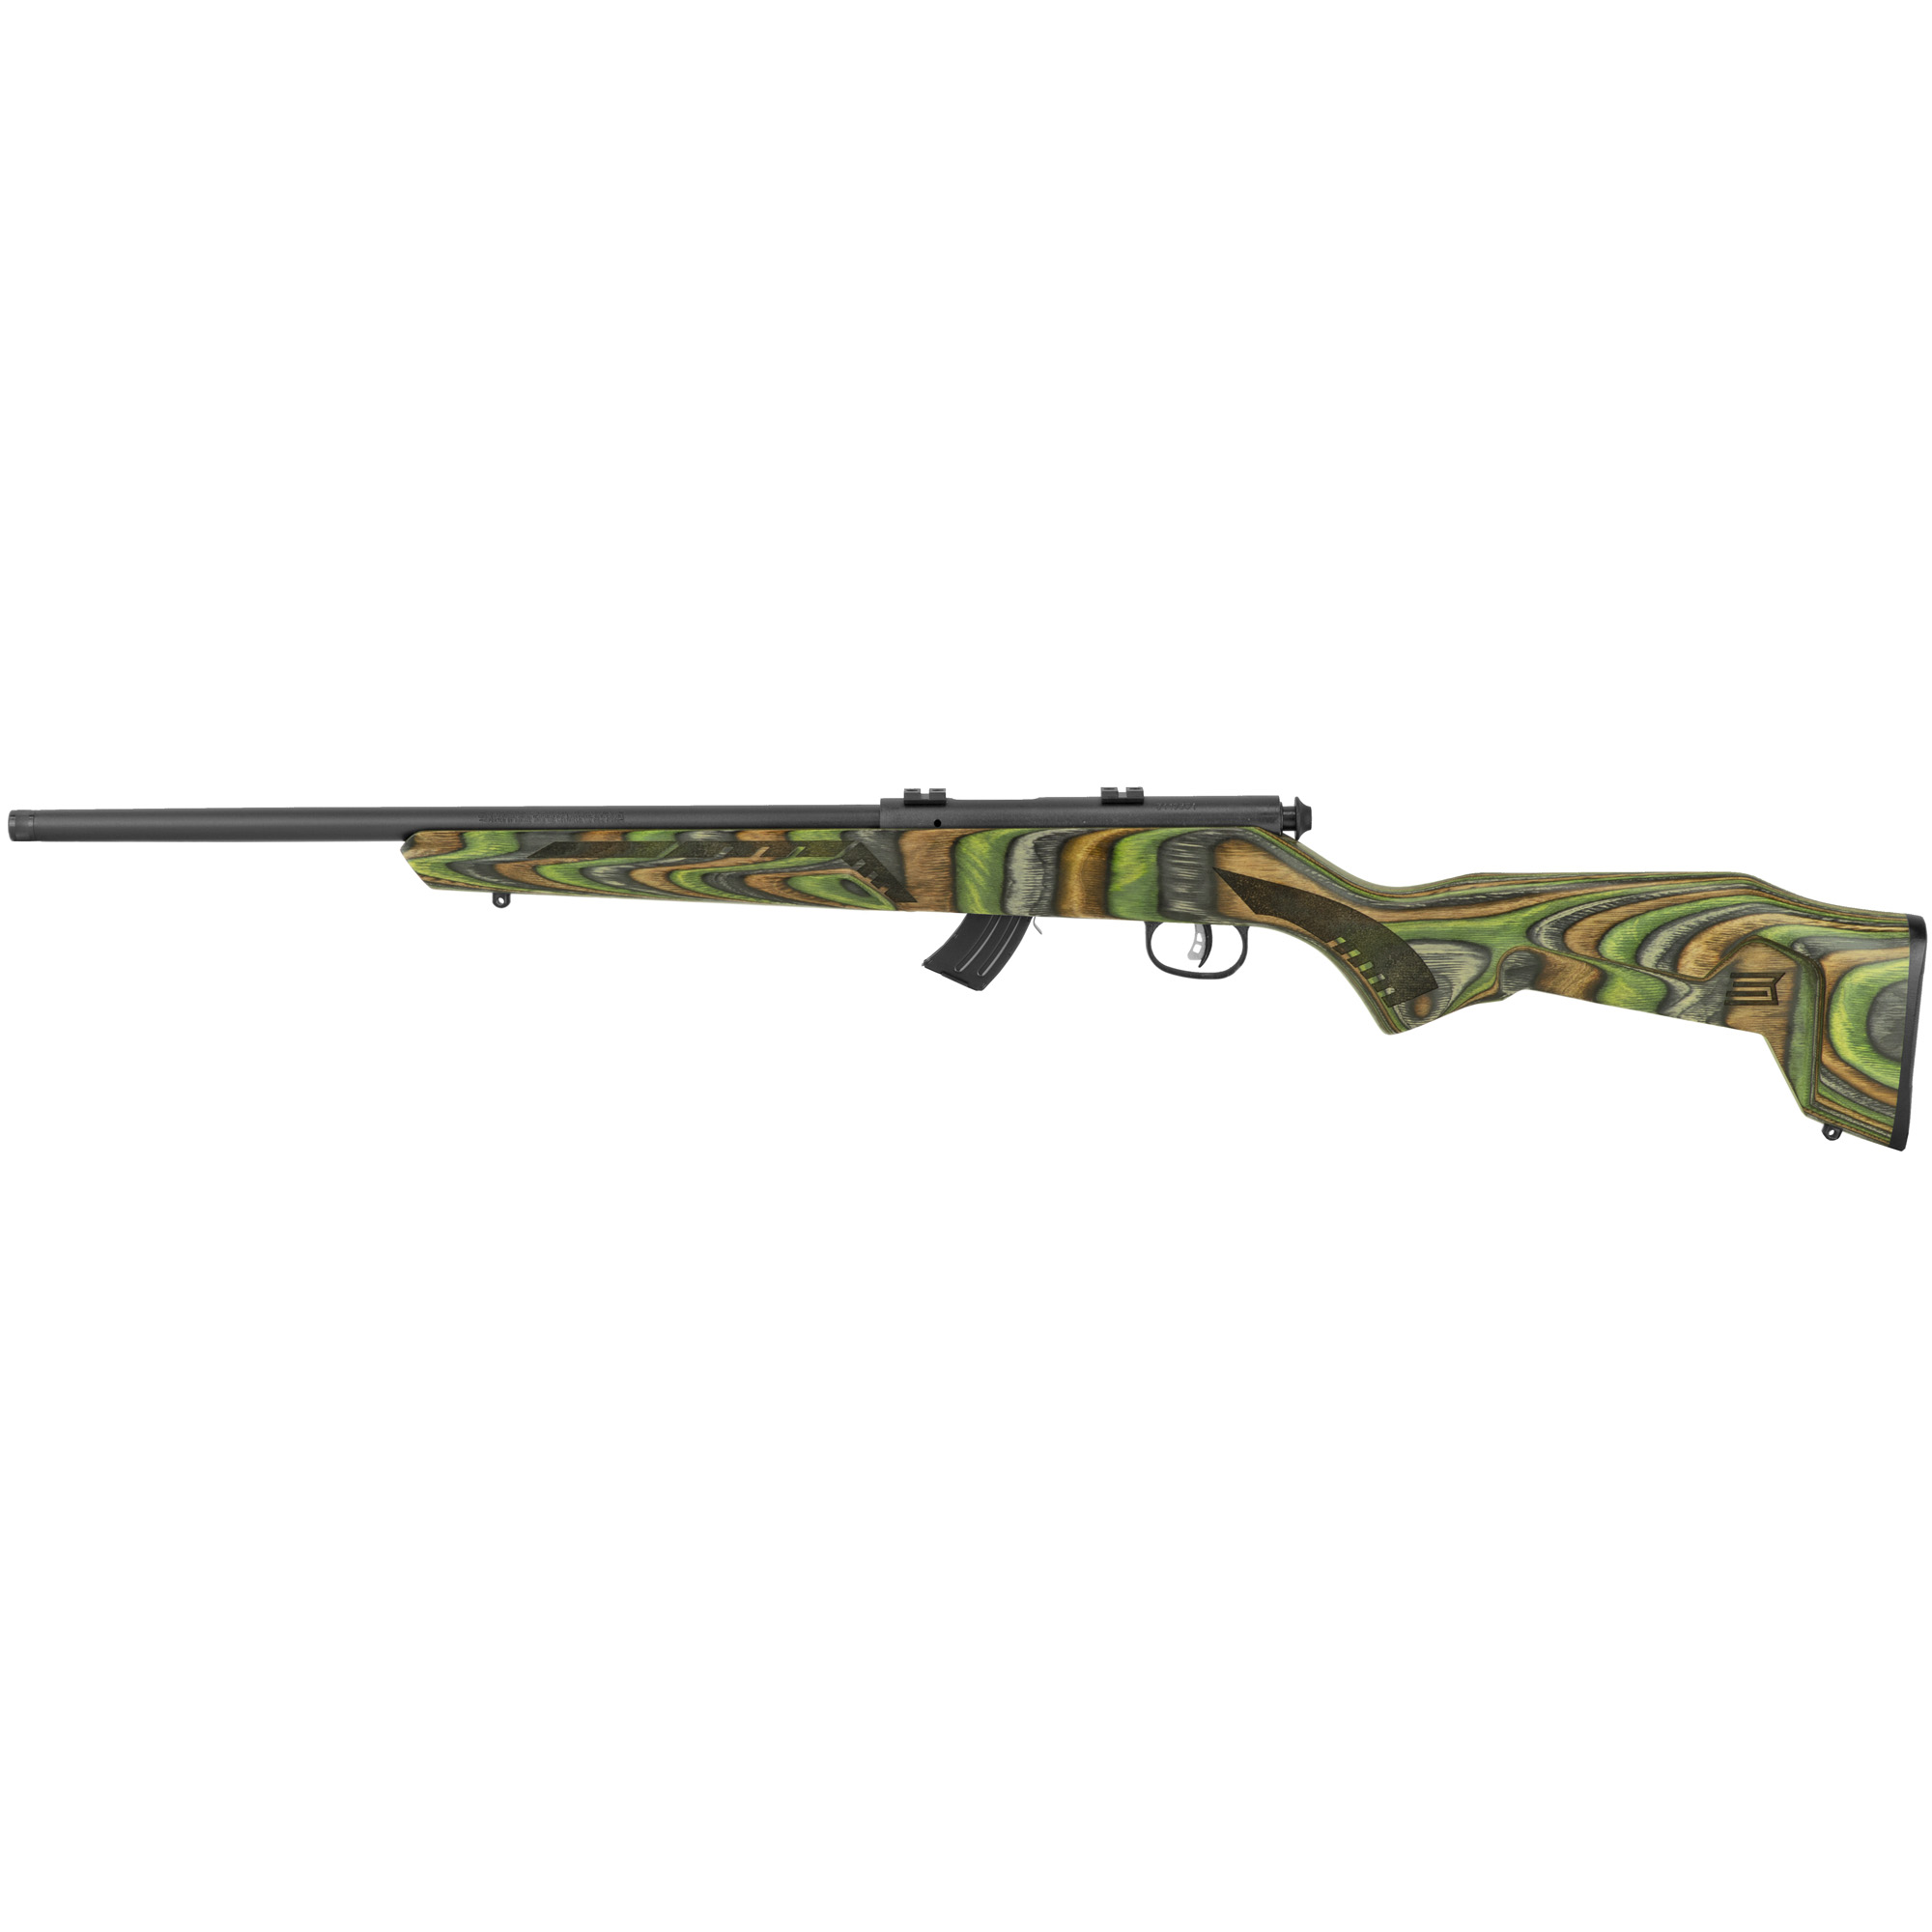 Savage, Mark II, Bolt Action, Rifle, 22LR, 18" Barrel, Green, Laminate Stock, Right Hand, 10Rd, Includes 2-piece Weaver Base and 1-10rd Magazine